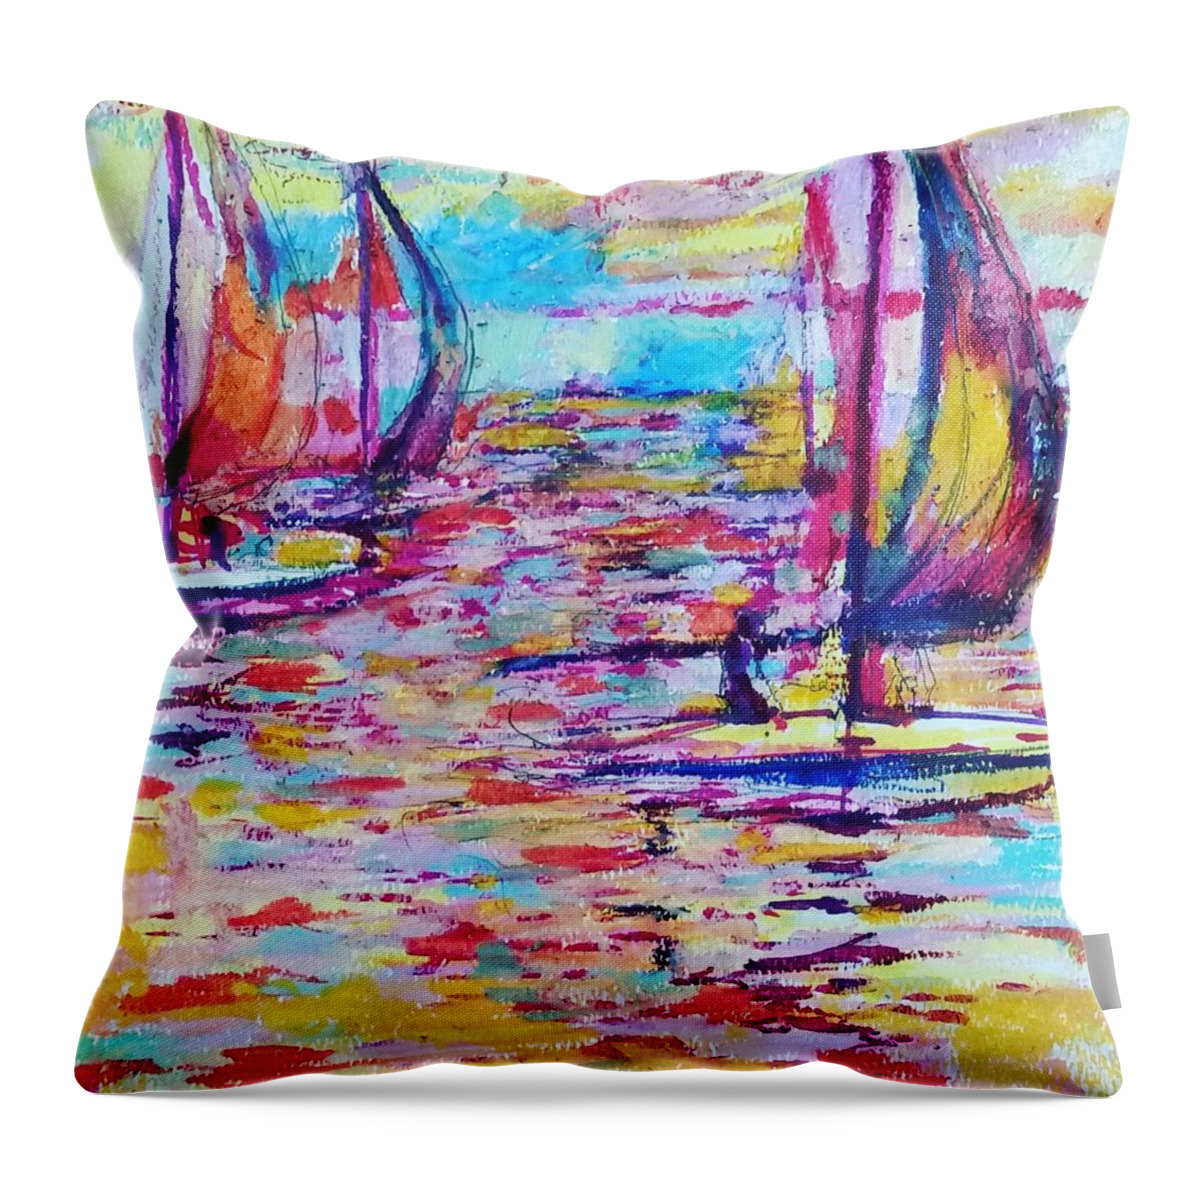 Nautical Throw Pillow featuring the painting Sail Away by Linette Childs